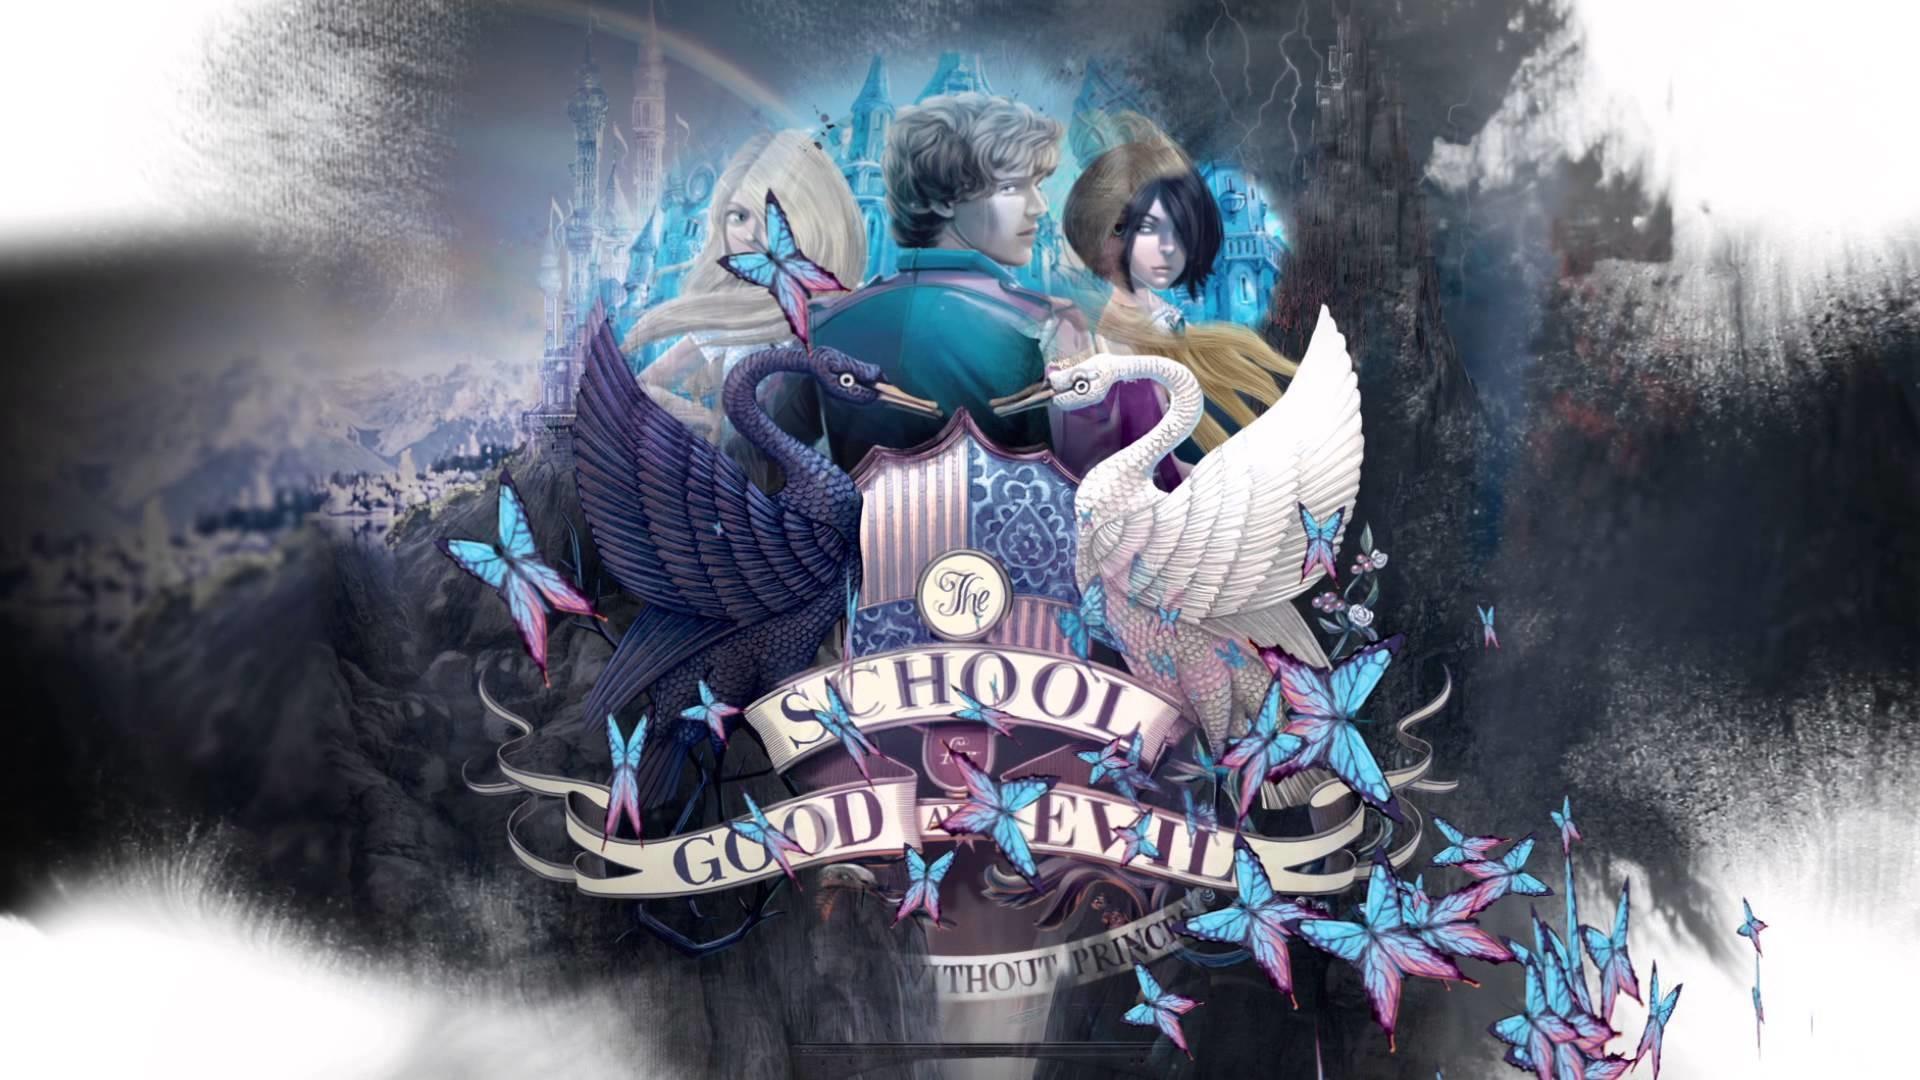 Official Wallpaper: 'The School for Good & Evil' Series